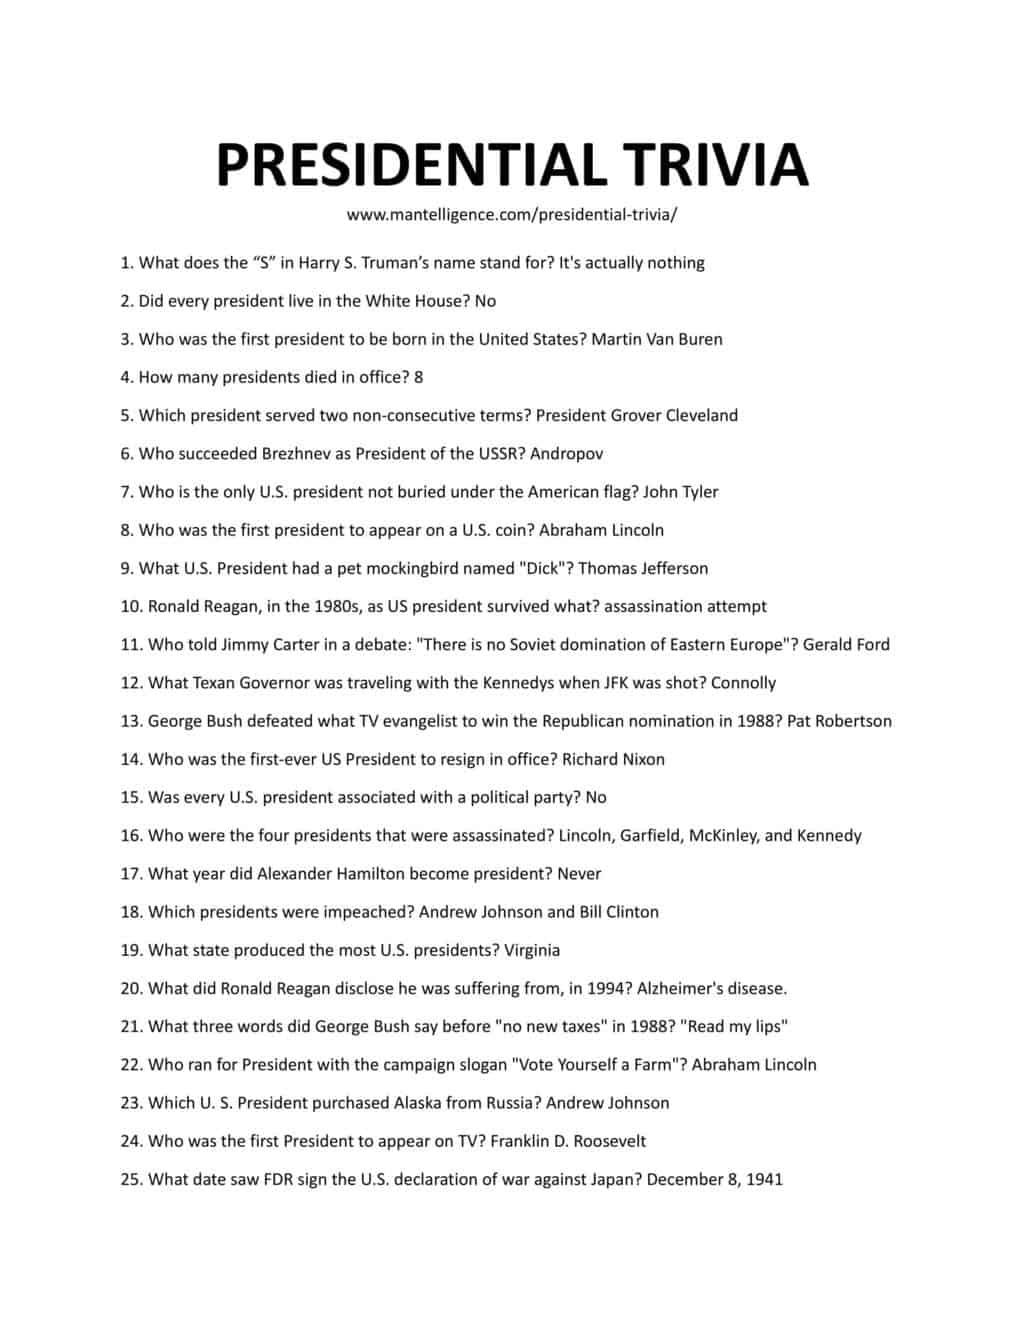 52-presidential-trivia-it-s-great-to-learn-more-about-heads-of-state